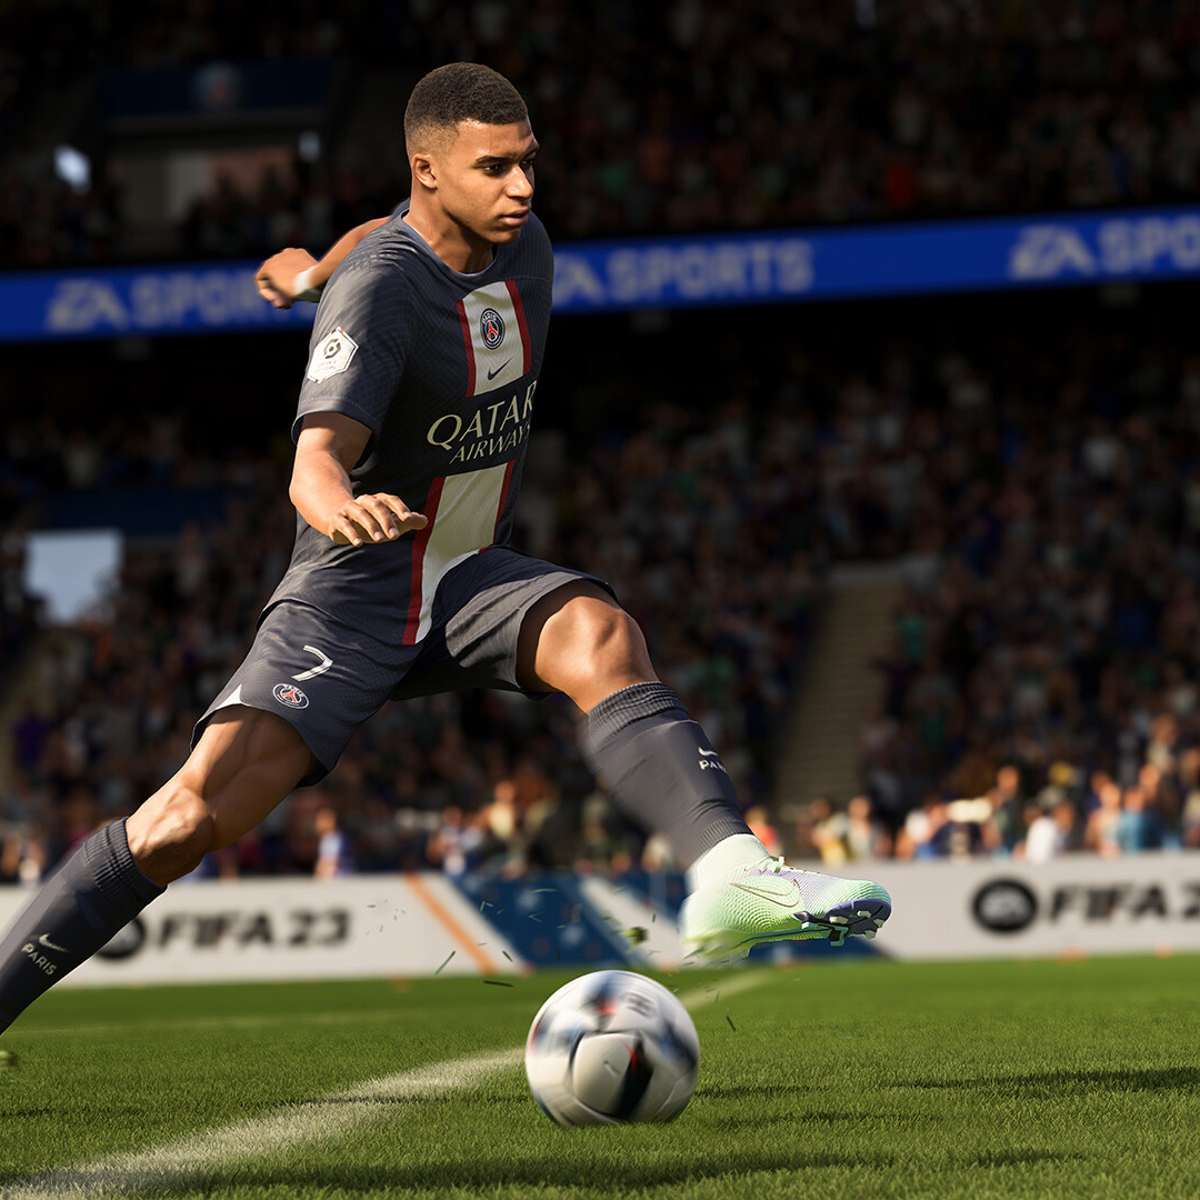 FIFA 23 hits Xbox Game Pass Ultimate and EA Play next week